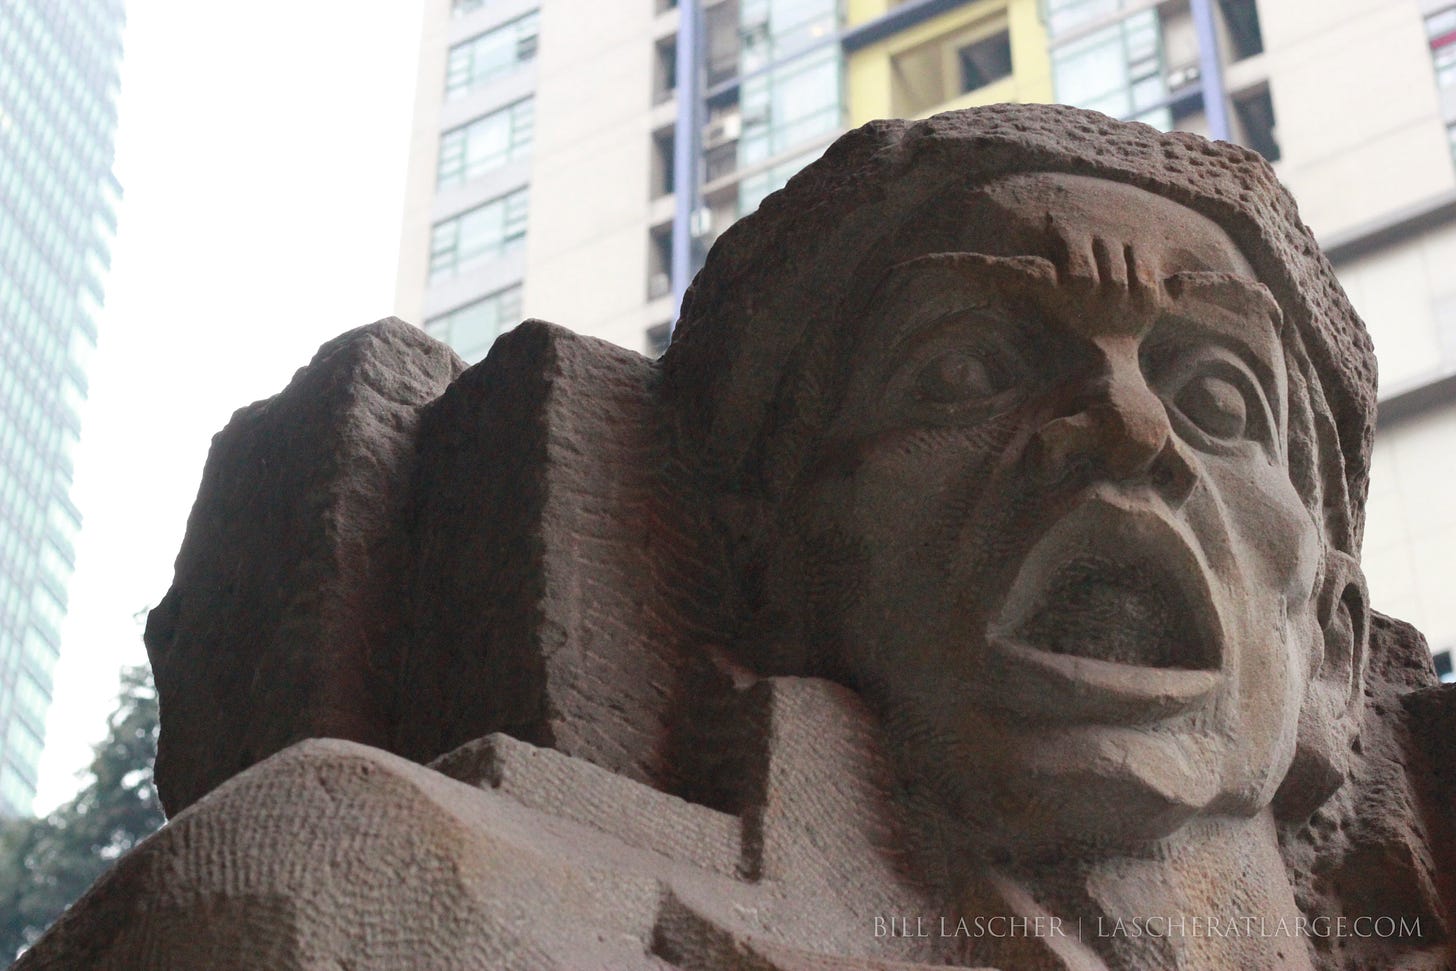 A carved stone face half in shadow carries a horrified, open-mouthed expression. The features are angular and stark. The face fill's the image's foreground while the windows of two large modern apartment towers are visible in the background.